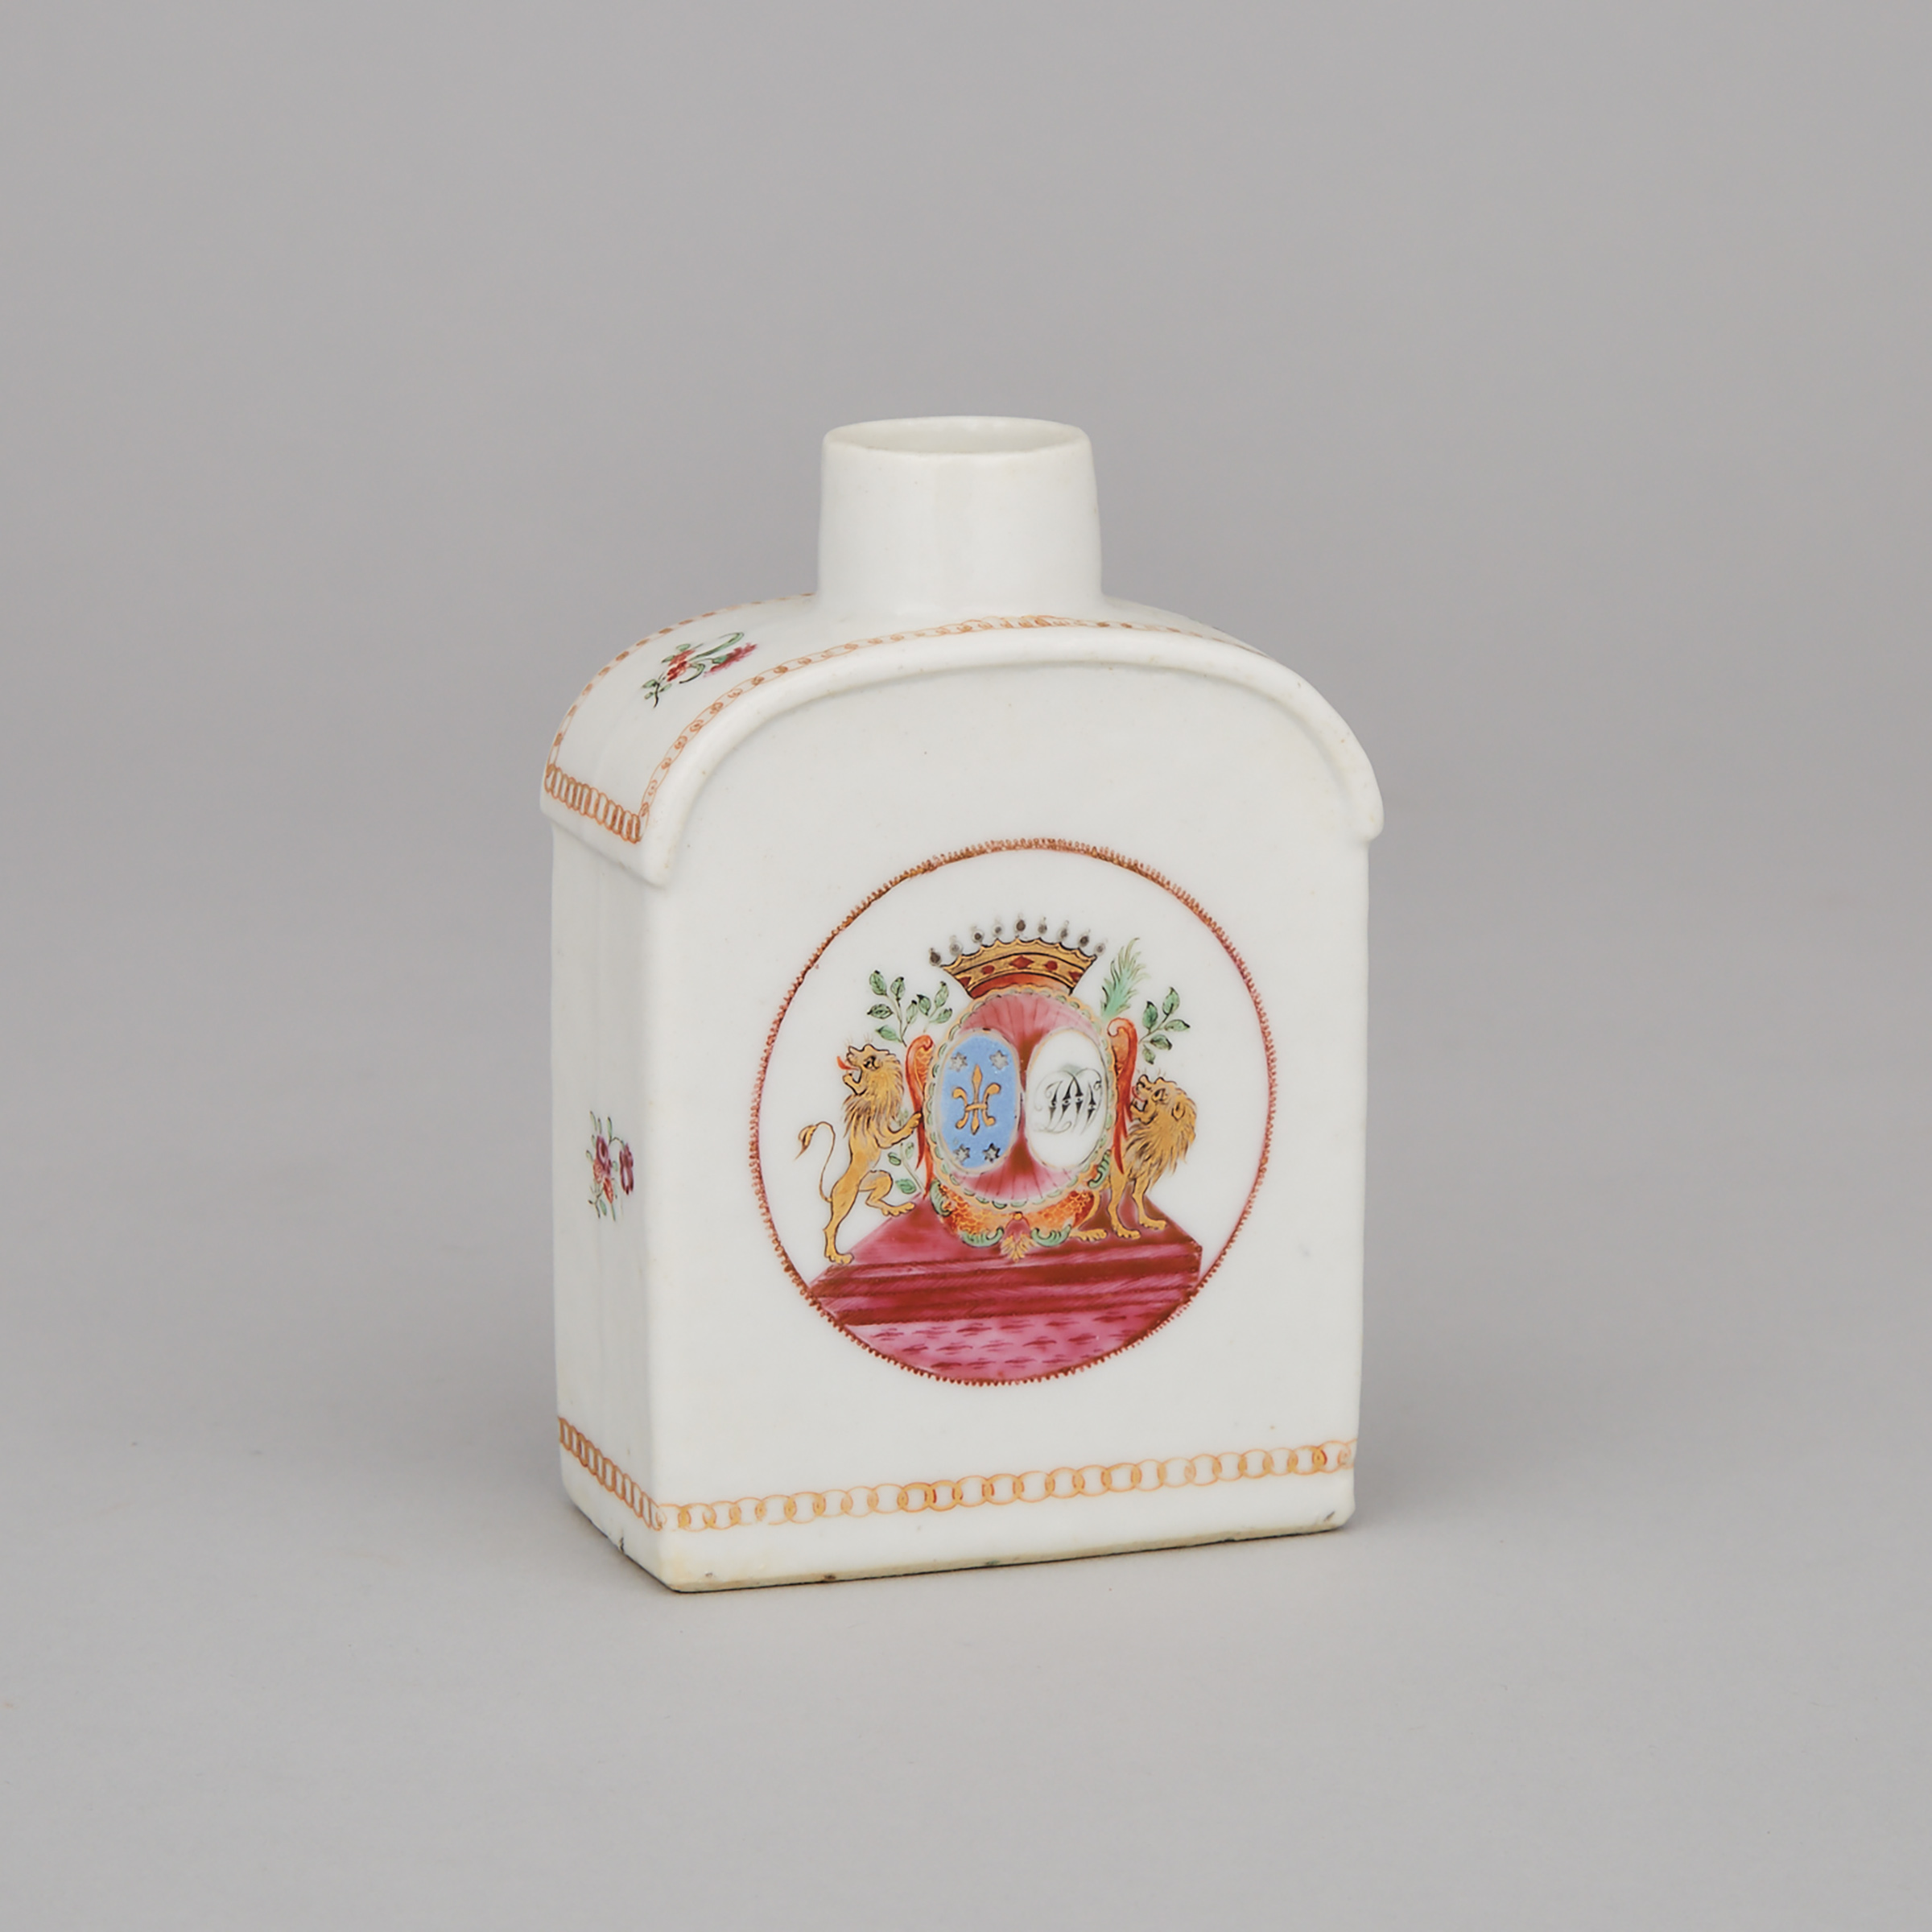 Chinese Export Porcelain Armorial Tea Canister, late 18th century